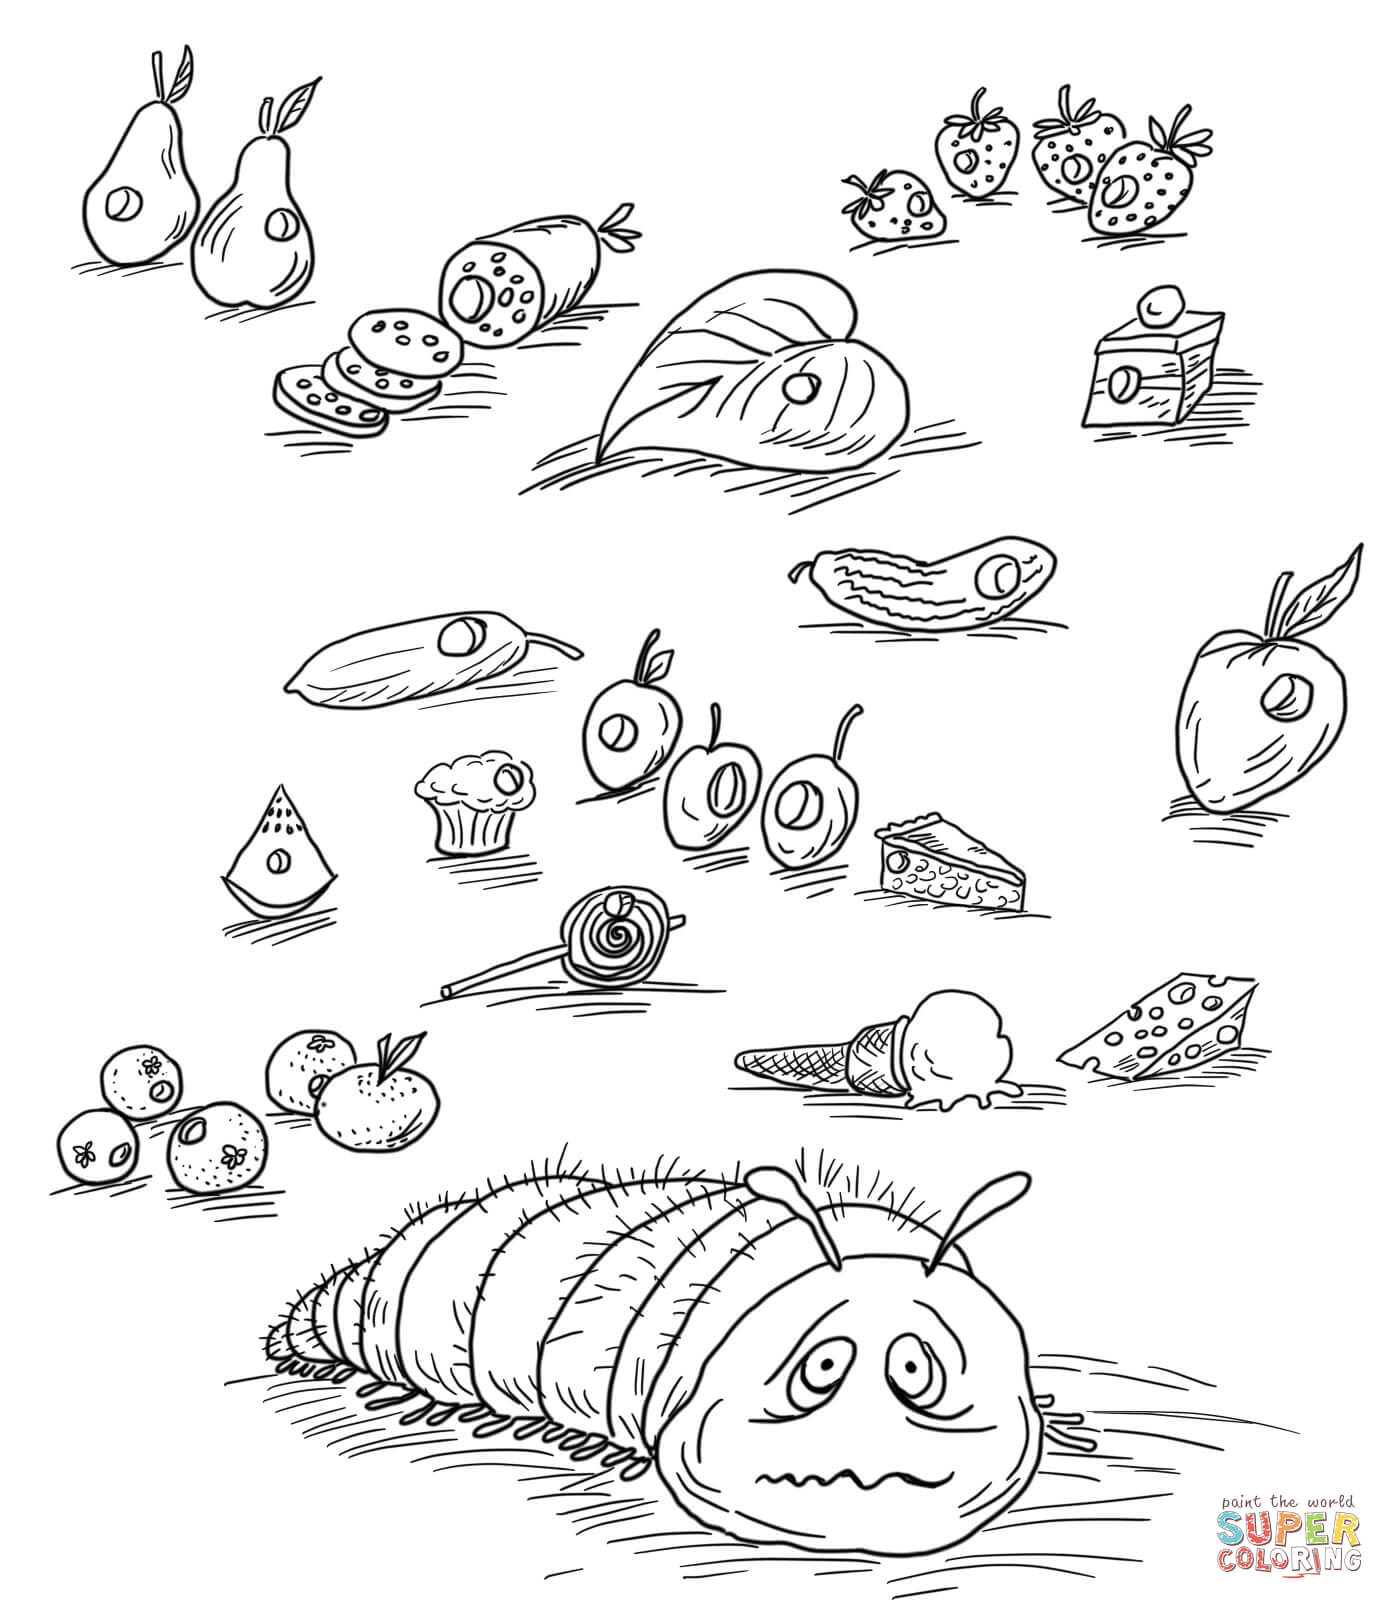 Free Very Hungry Caterpillar Coloring Pages, Download Free Very Hungry